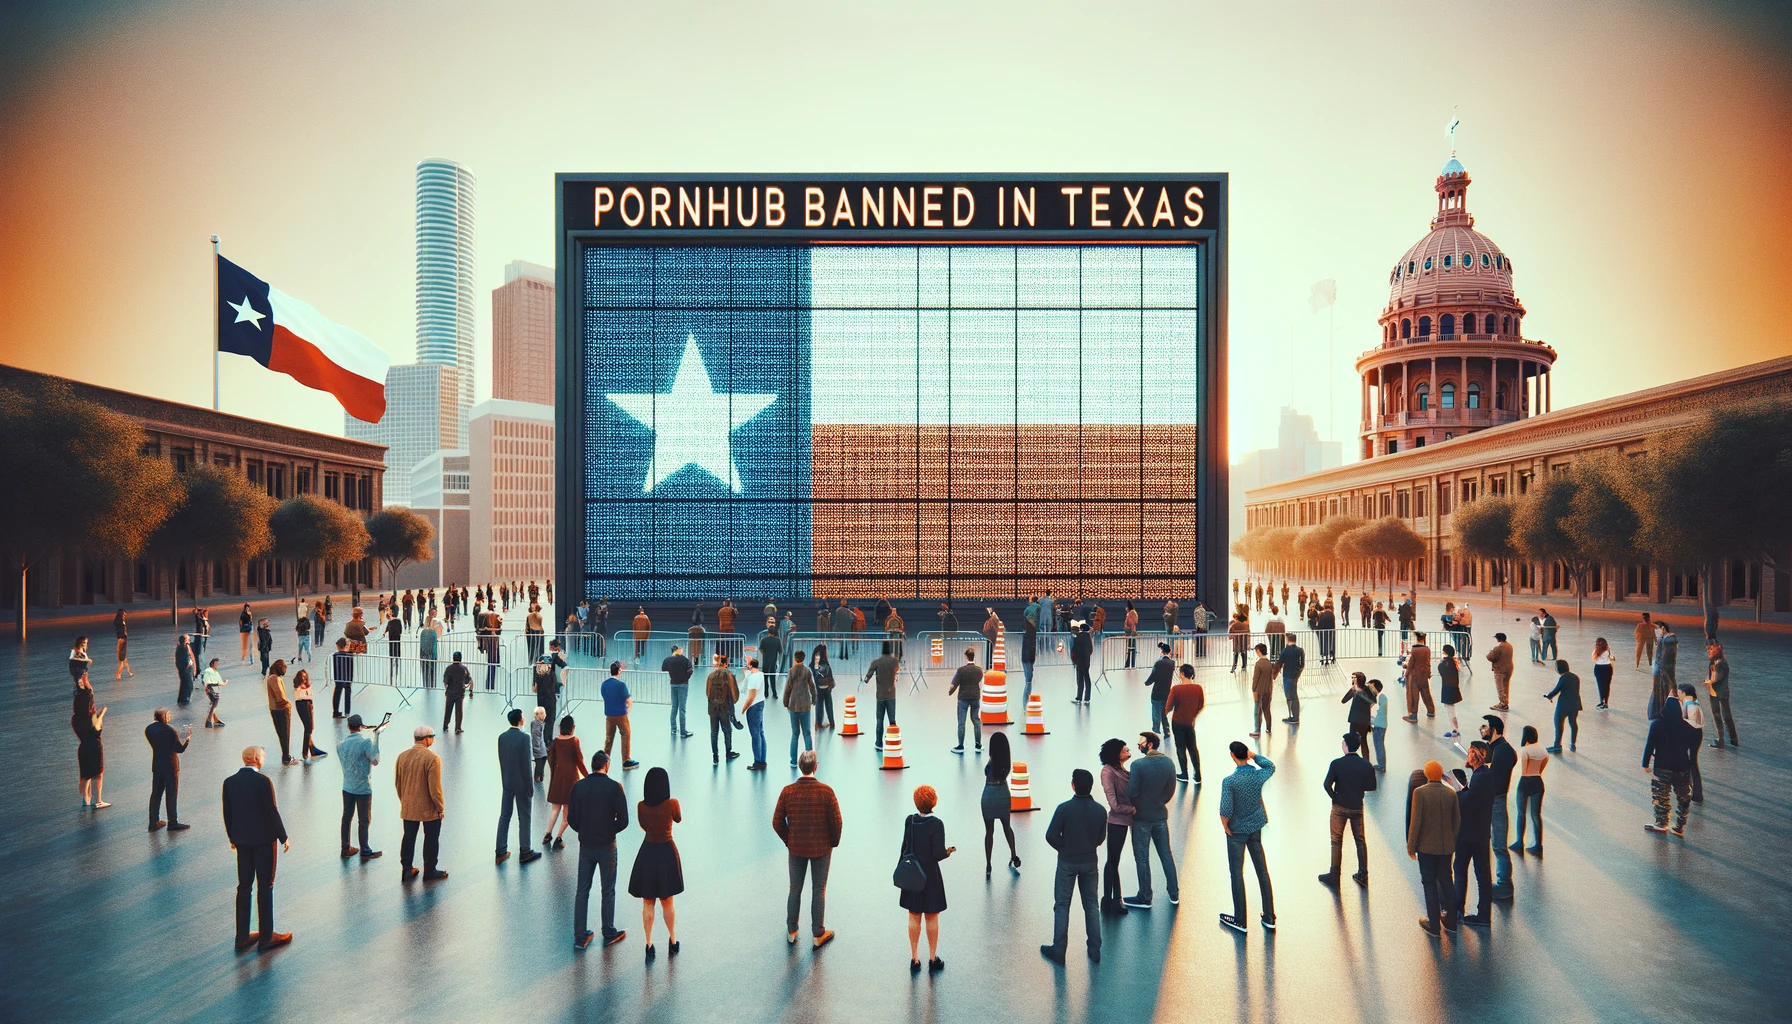 Pornhub Banned in Texas: A Comprehensive Analysis